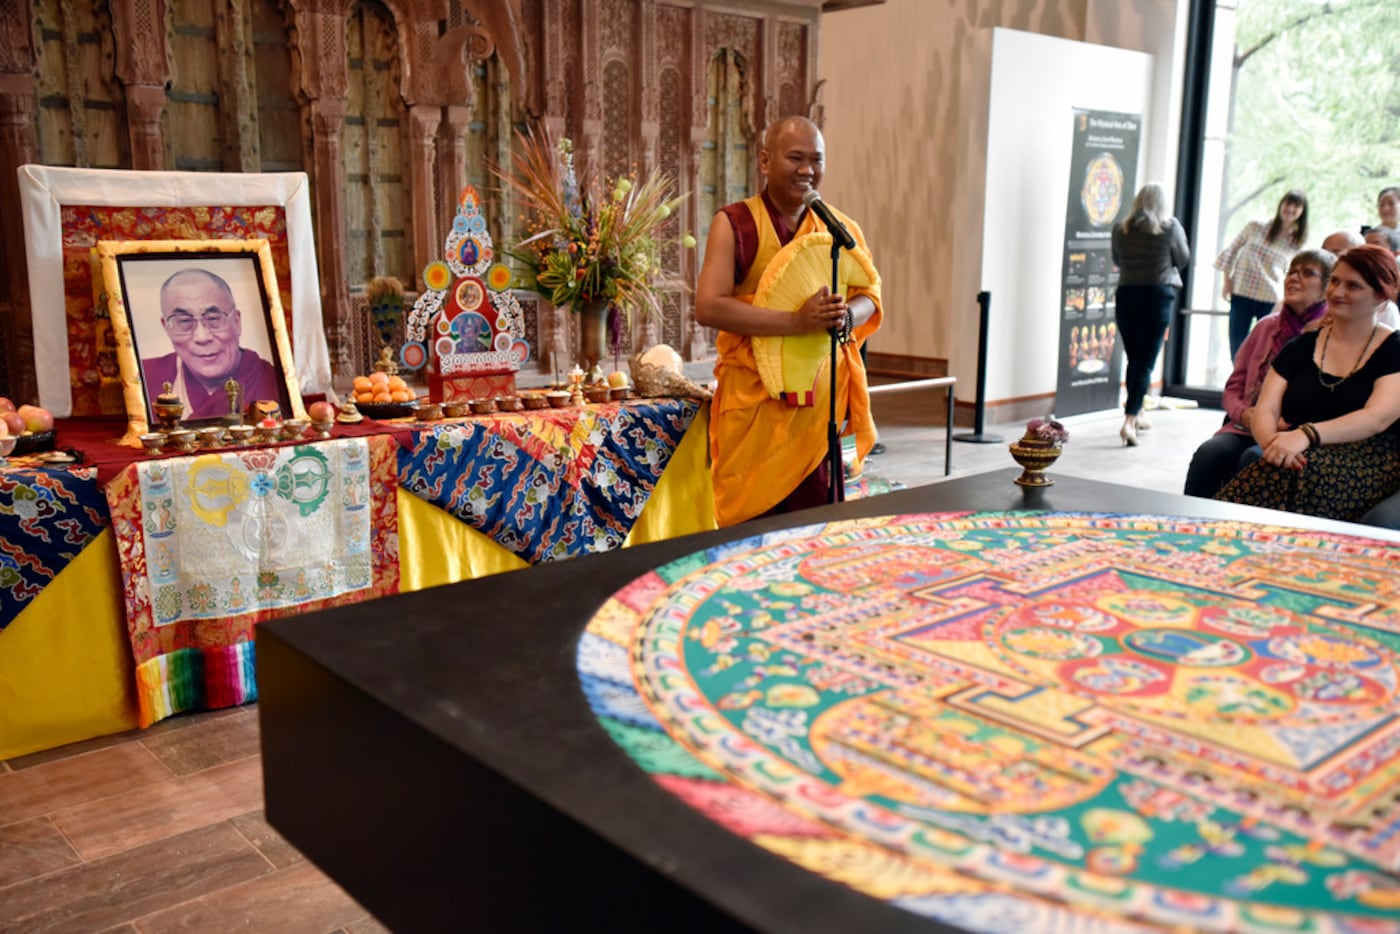 Buddhist monk Geshe Tenzin Phentsok conducts a lecture on Buddhism during the Mystical Arts...